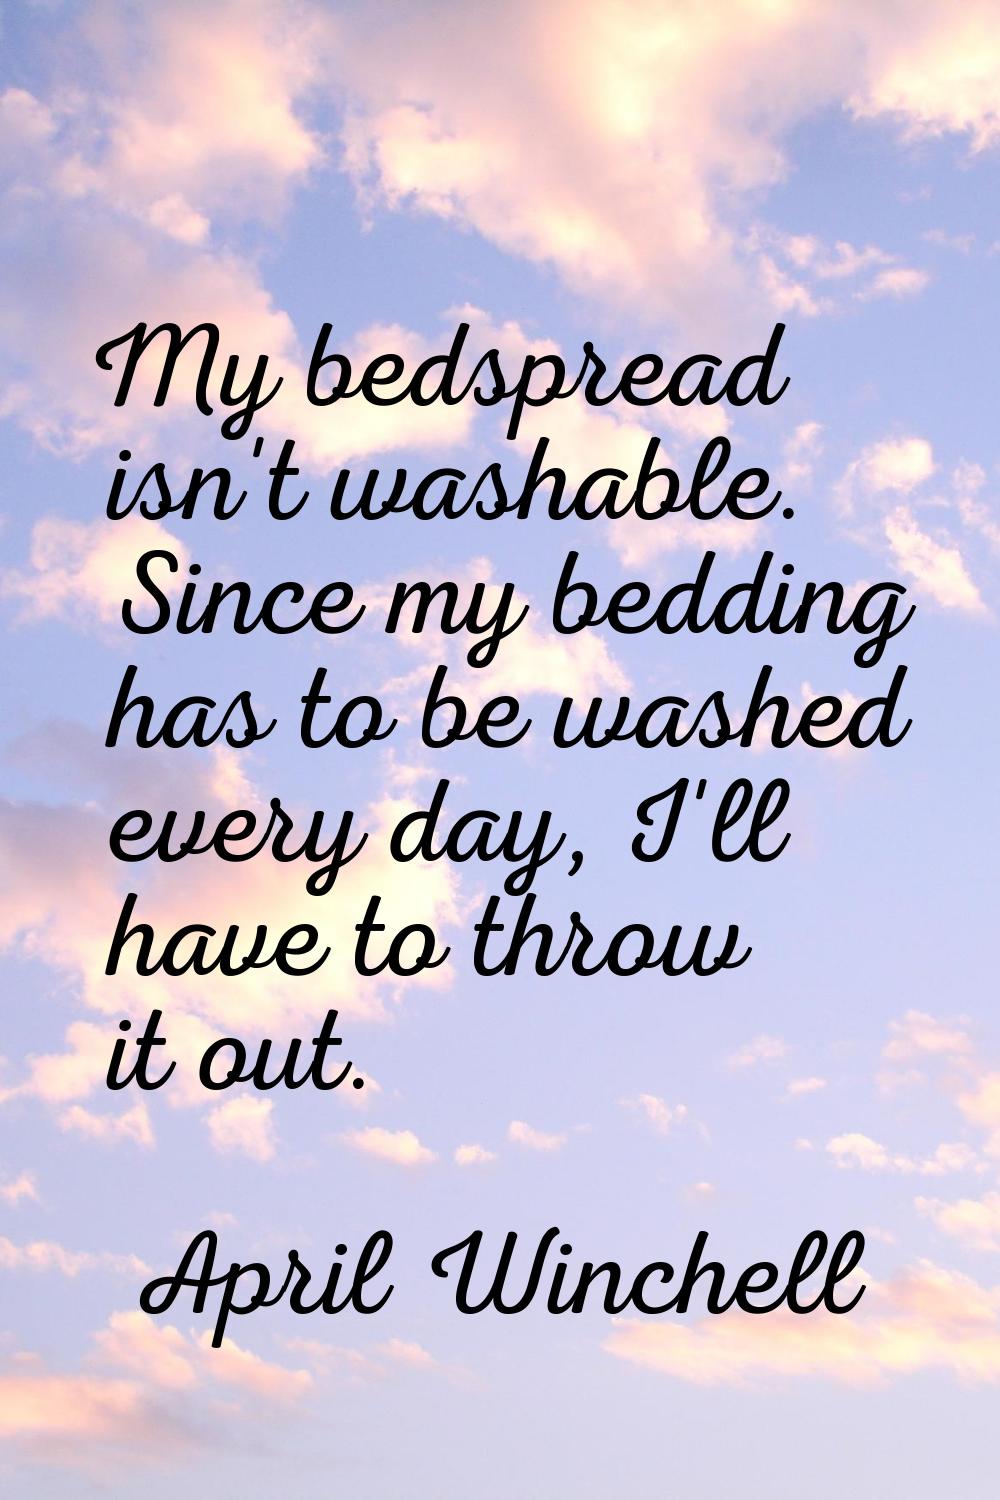 My bedspread isn't washable. Since my bedding has to be washed every day, I'll have to throw it out